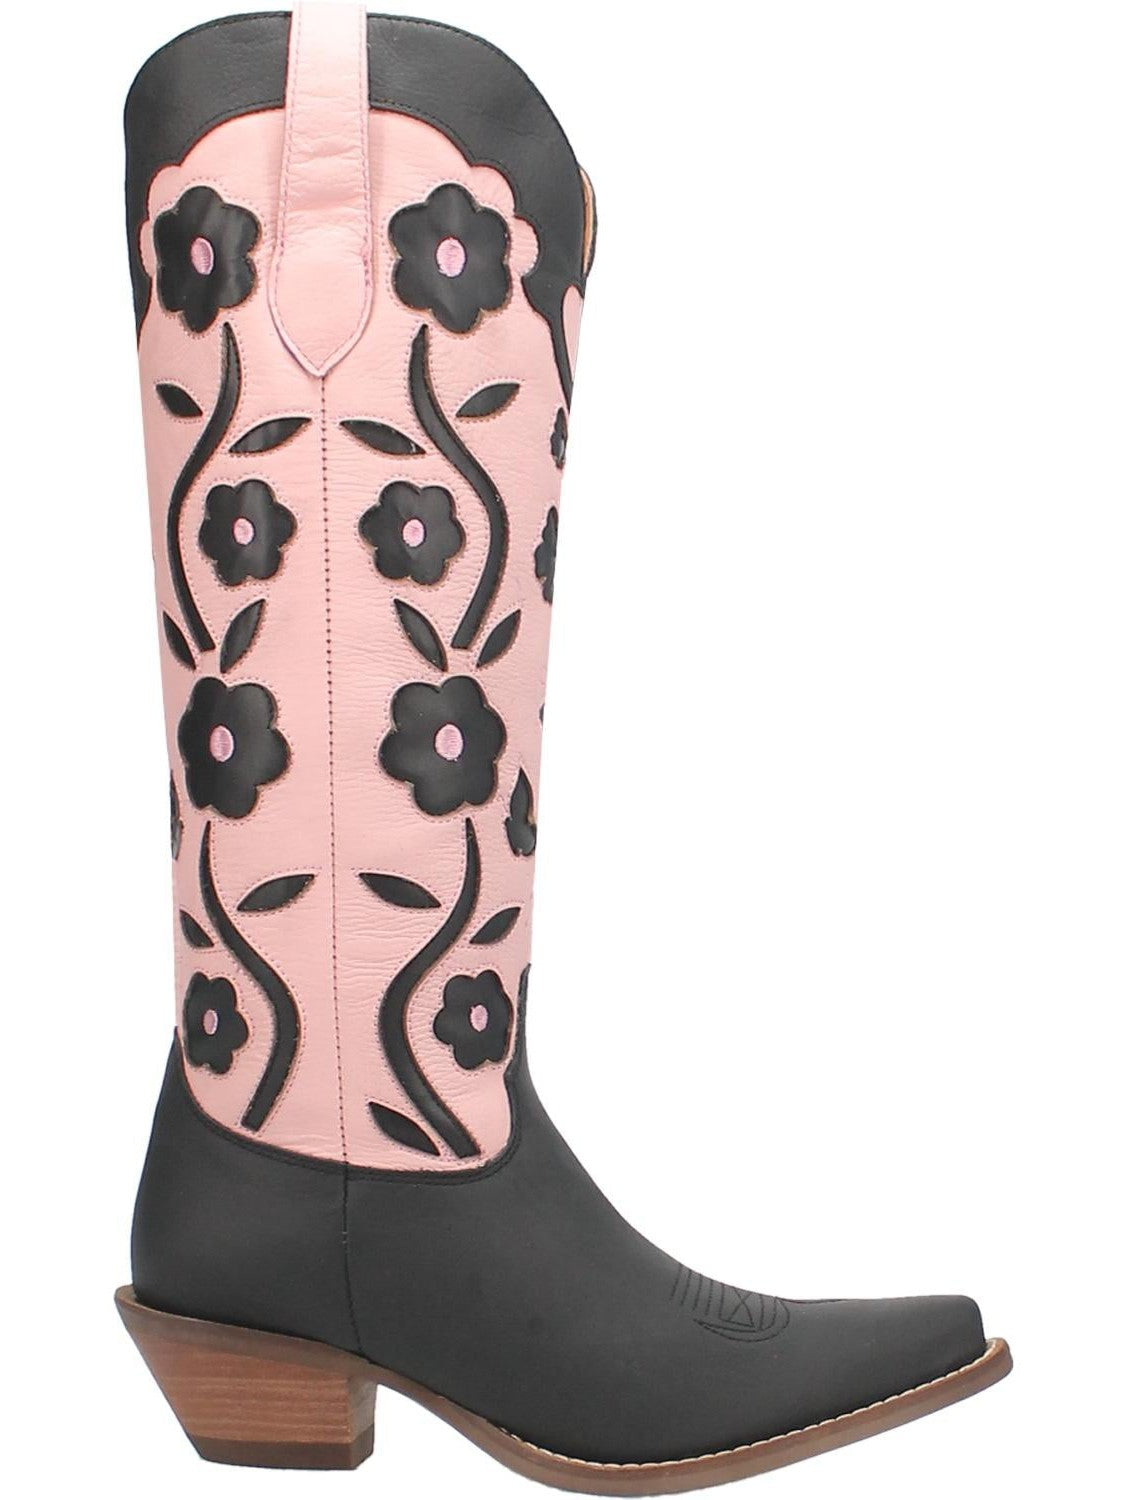 Floral cutout cowgirl boots in pink and black